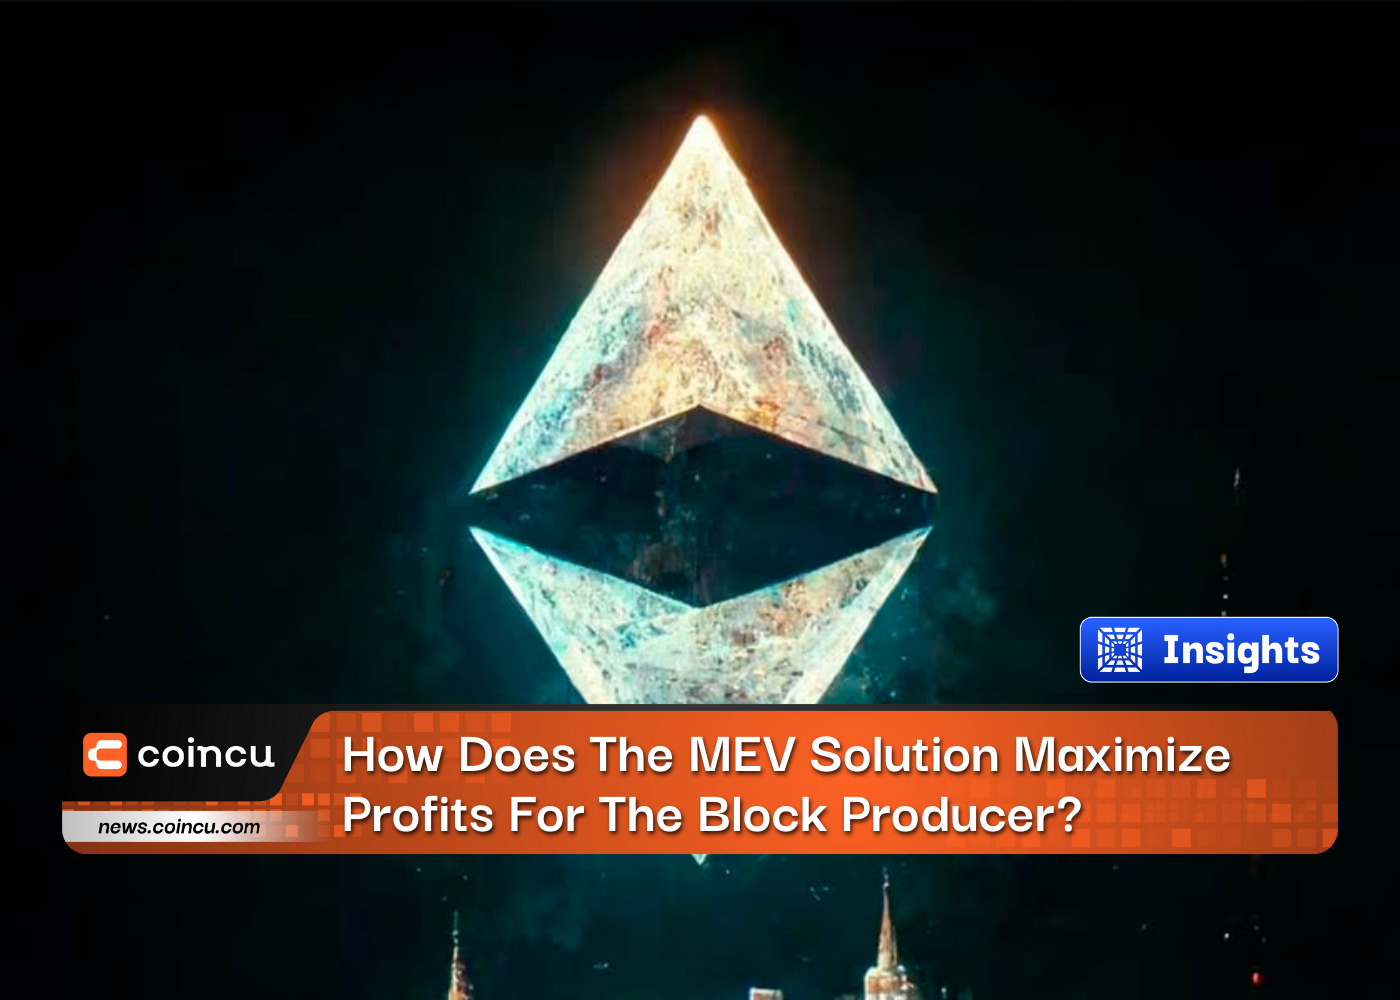 How Does The MEV Solution Maximize Profits For The Block Producer?